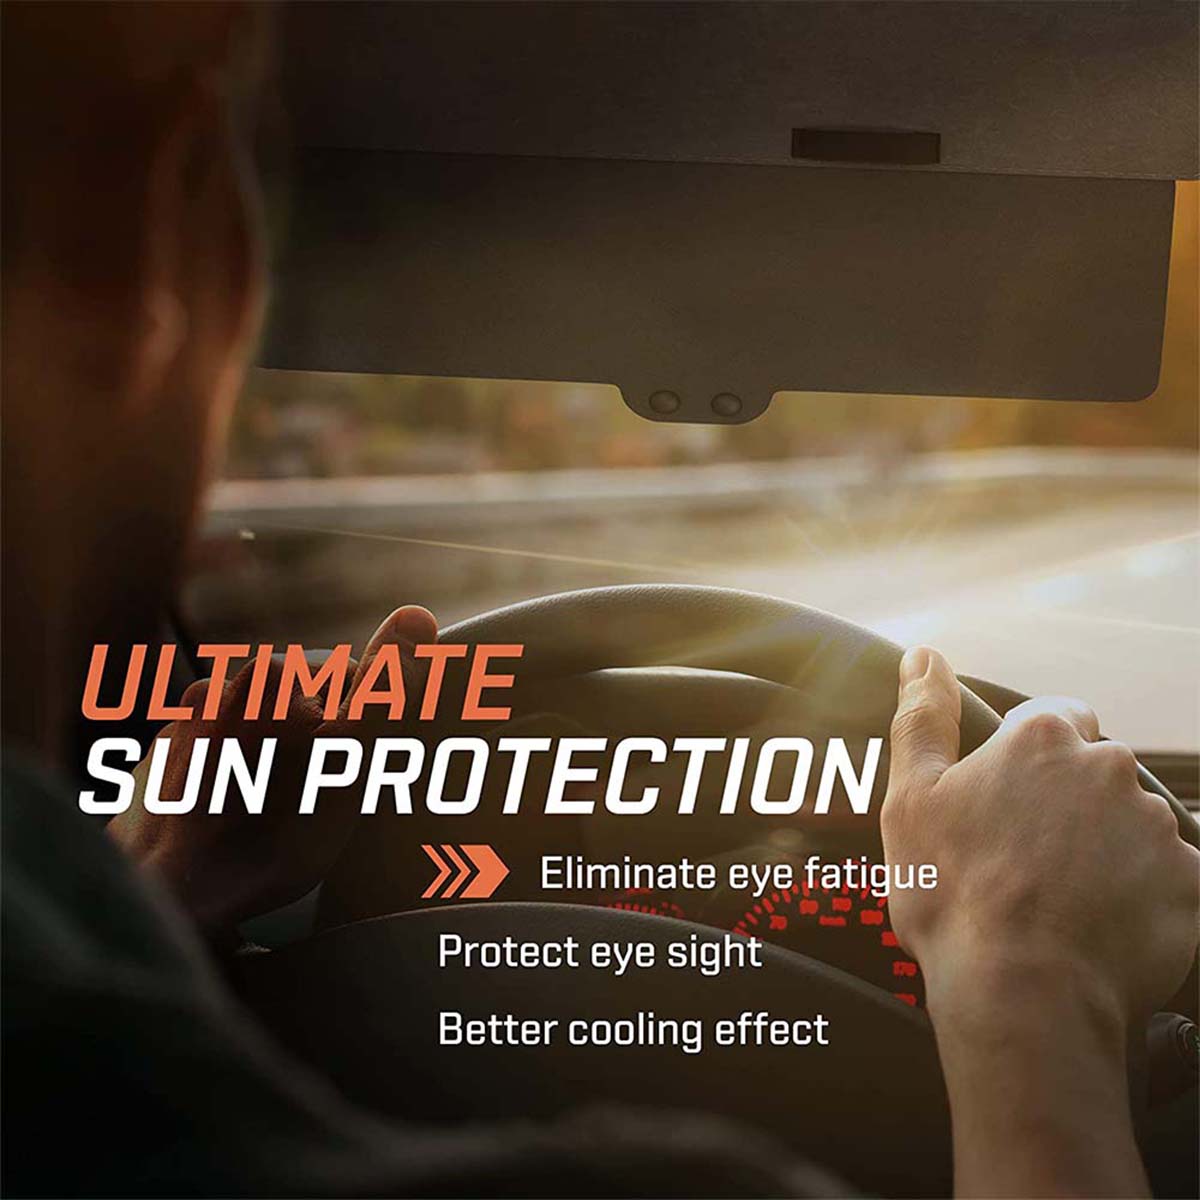 Delicate Leather Polarized Sun Visor Sunshade Extender for Car with Polycarbonate Lens, Custom For Your Cars, Anti-Glare Car Sun Visor Protects from Sun Glare, Snow Blindness, UV Rays, Universal for Cars, SUVs FJ13999 - Delicate Leather